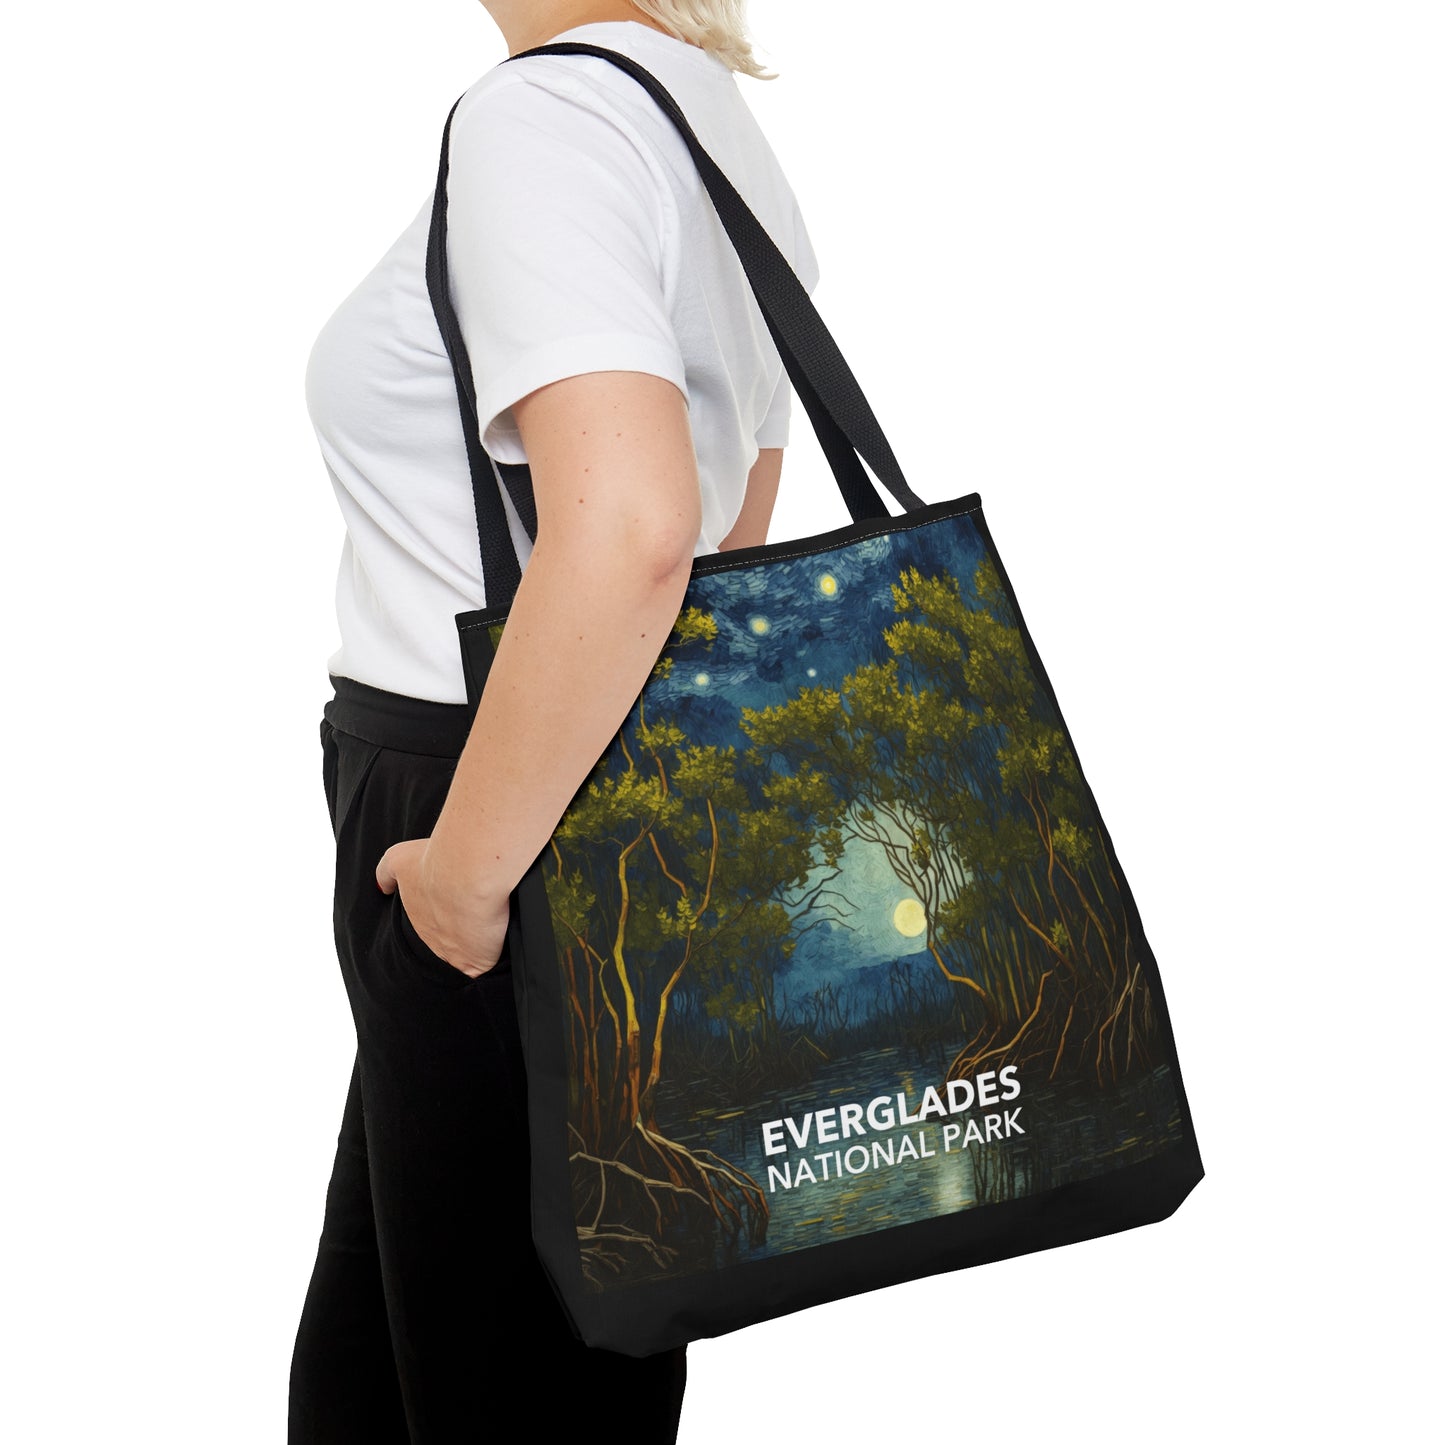 Everglades National Park Tote Bag - The Starry Night